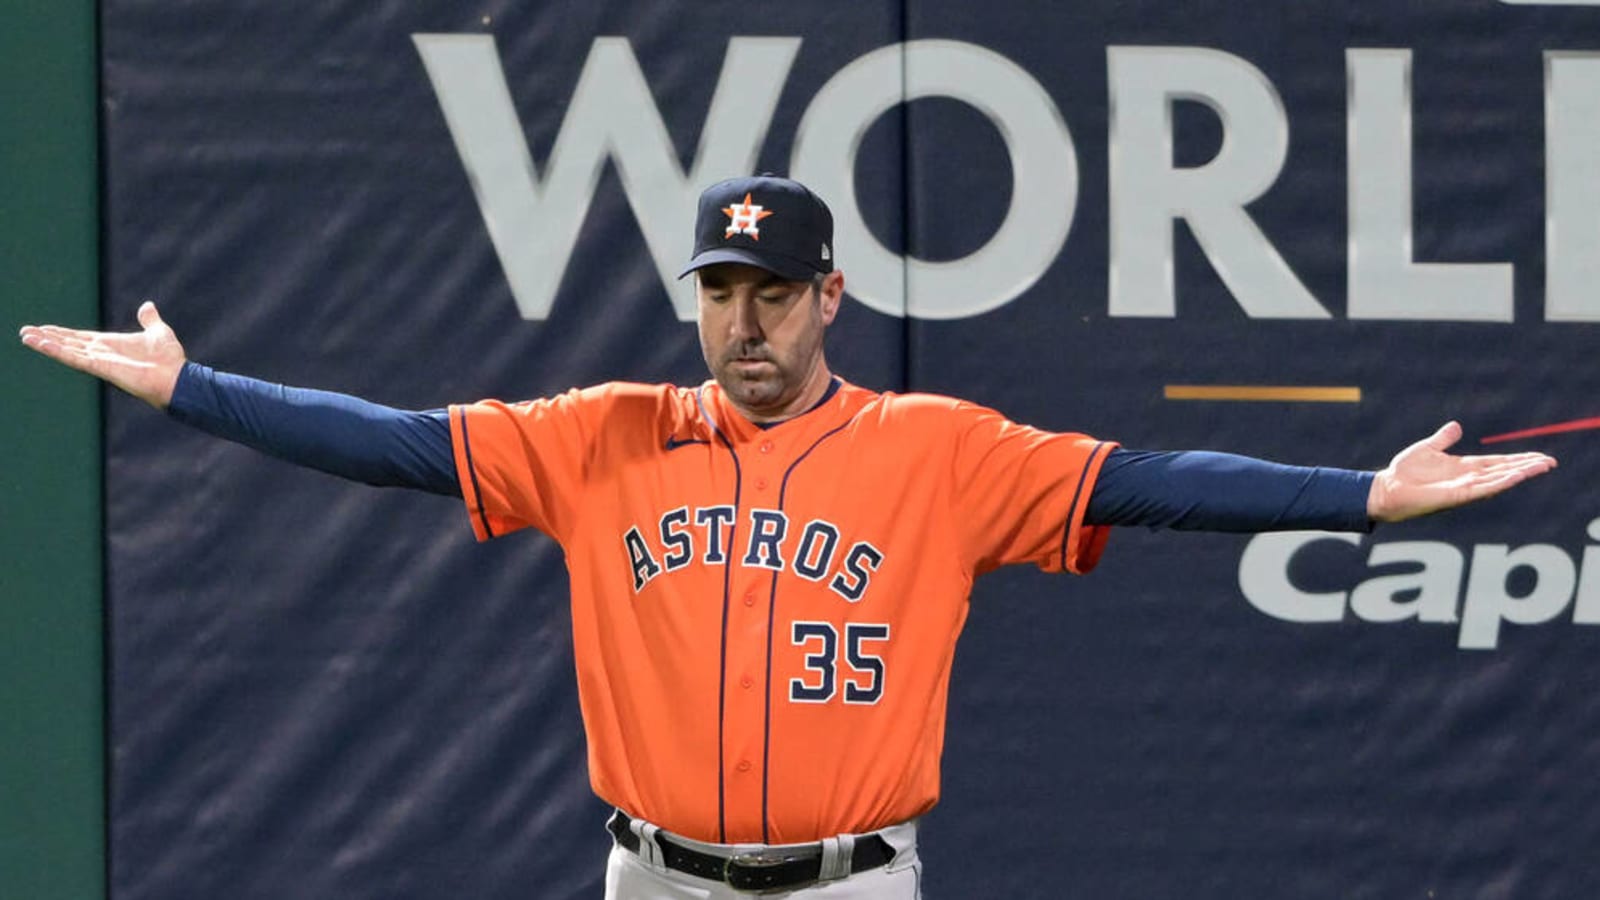 Justin Verlander earns first WS win as Astros take Game 5